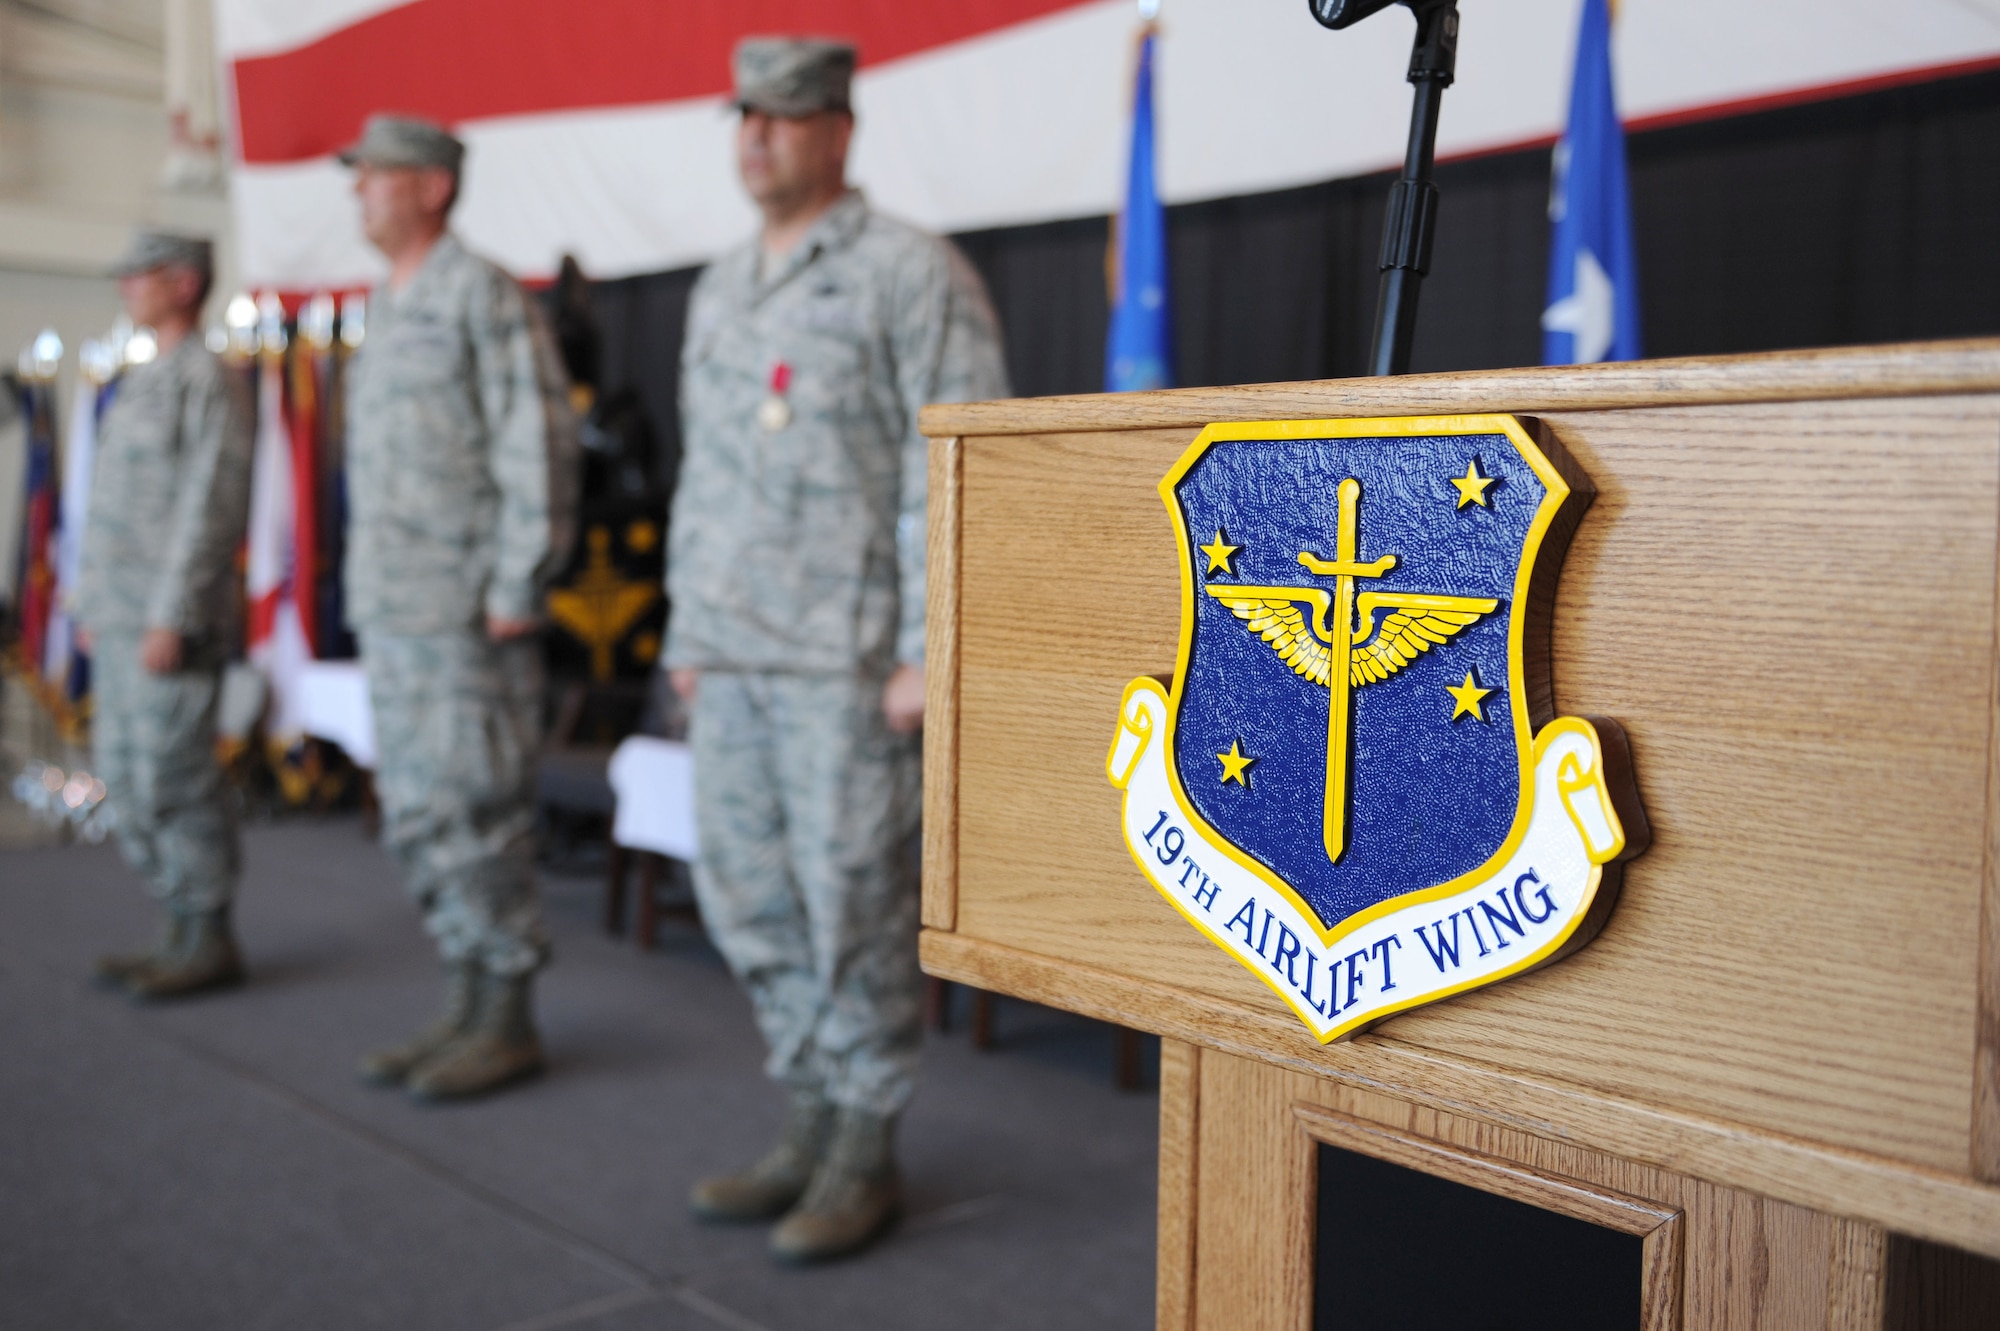 Lt. Gen. Robert Allardice (left), 18th Air Force commander, stands with Col. Michael Minihan, incoming 19th Airlift Wing commander, and Col. Greg Otey, outgoing 19th AW commander, during a change of command ceremony here Aug. 2. The 19th AW is the host unit to the largest C-130 base in the world.  (U.S. Air Force photo by Senior Airman Steele C.G. Britton)